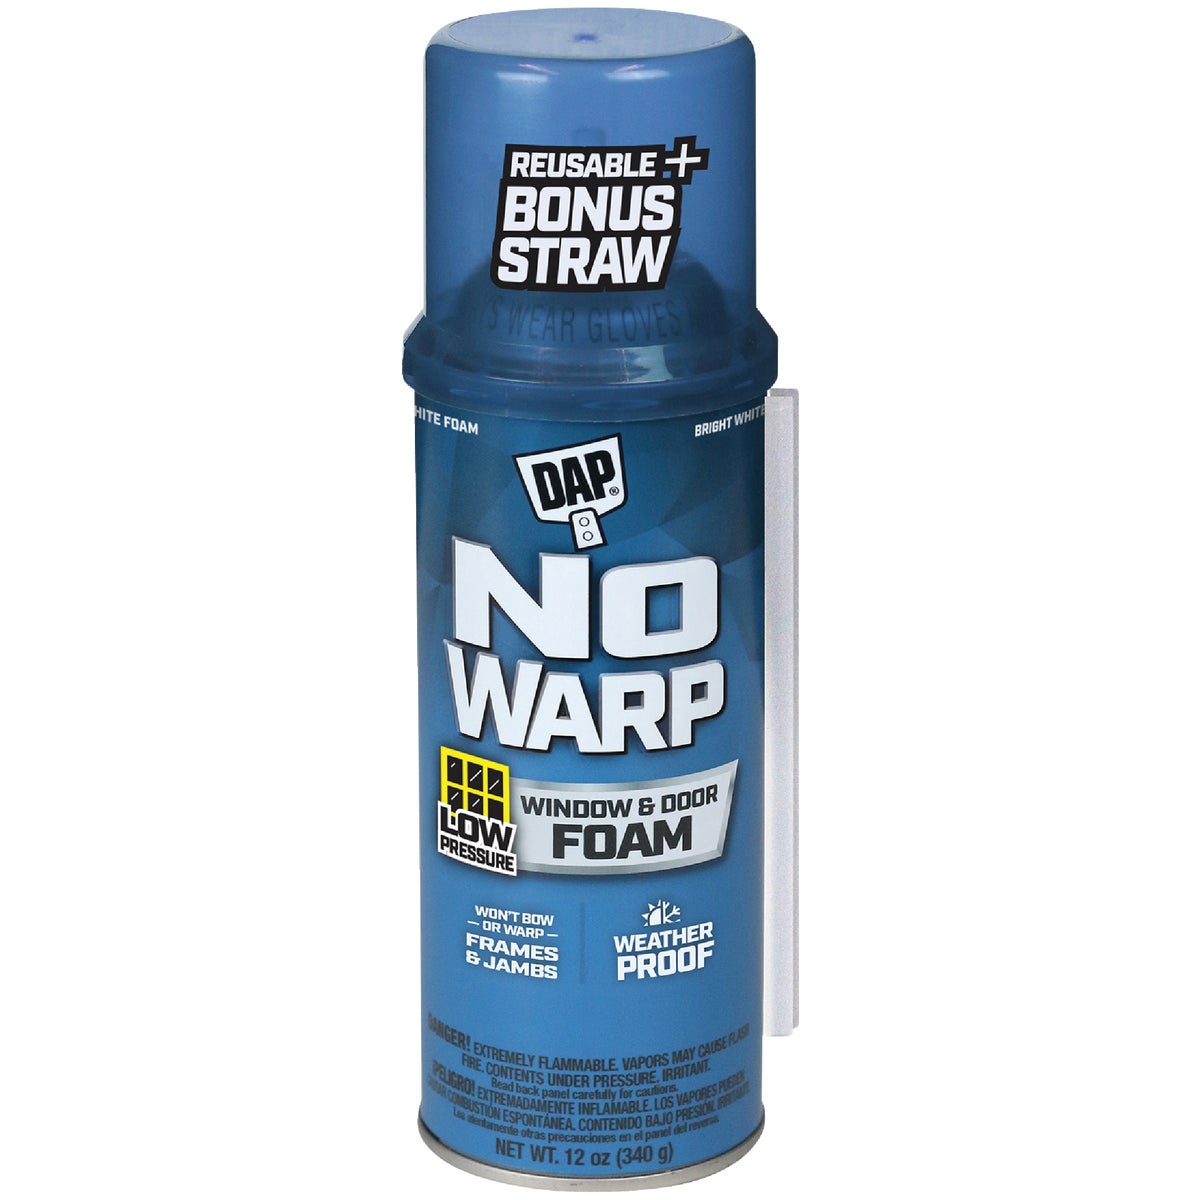 Item 265769, Polyurethane insulating sealant specifically formulated to block drafts and